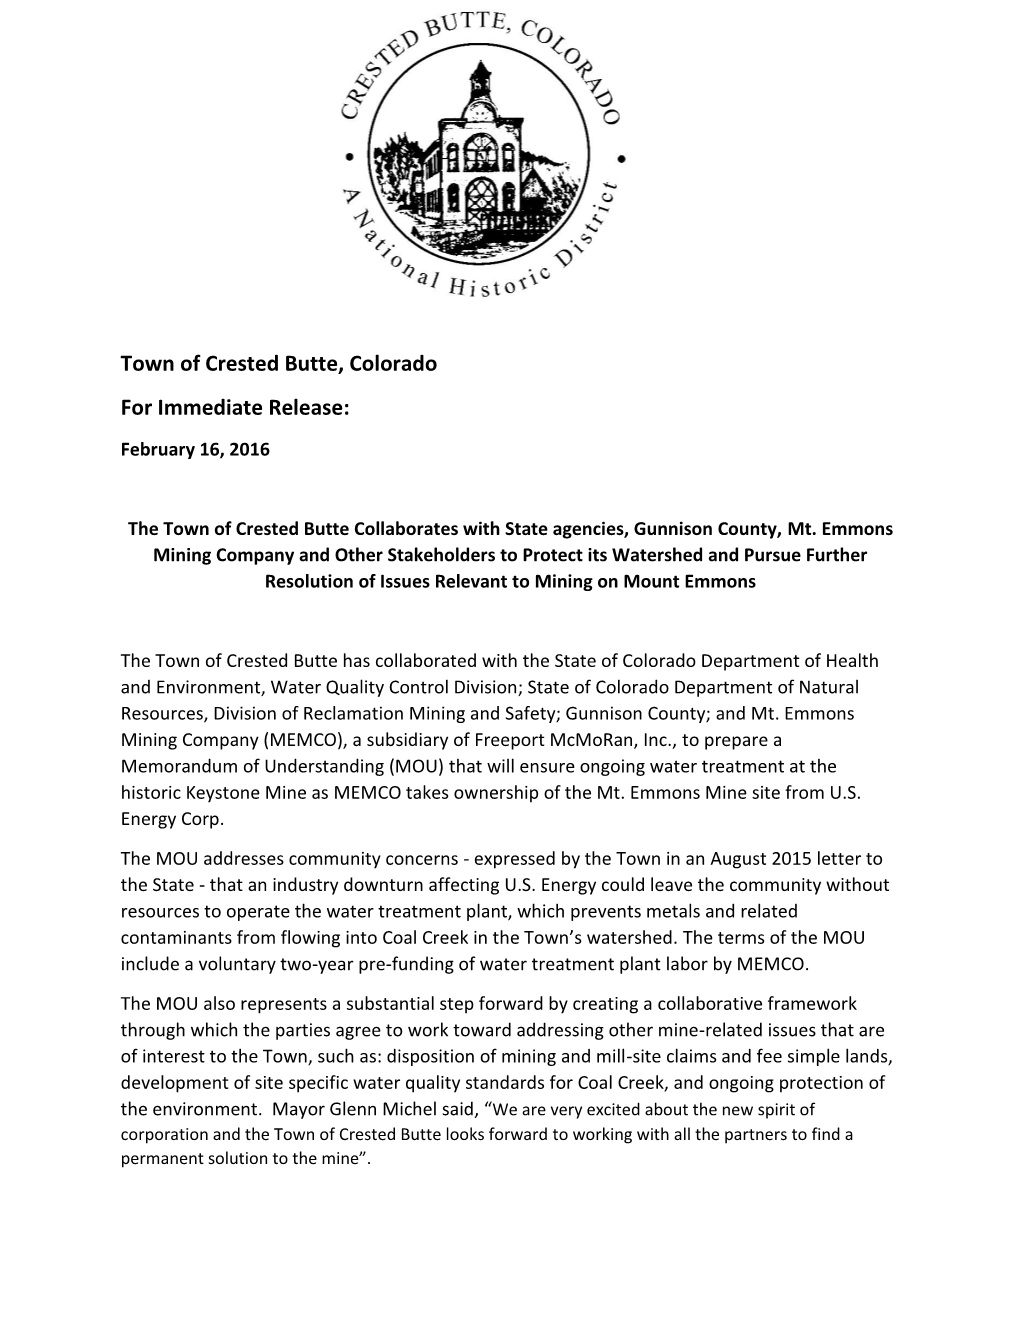 Town of Crested Butte, Colorado for Immediate Release